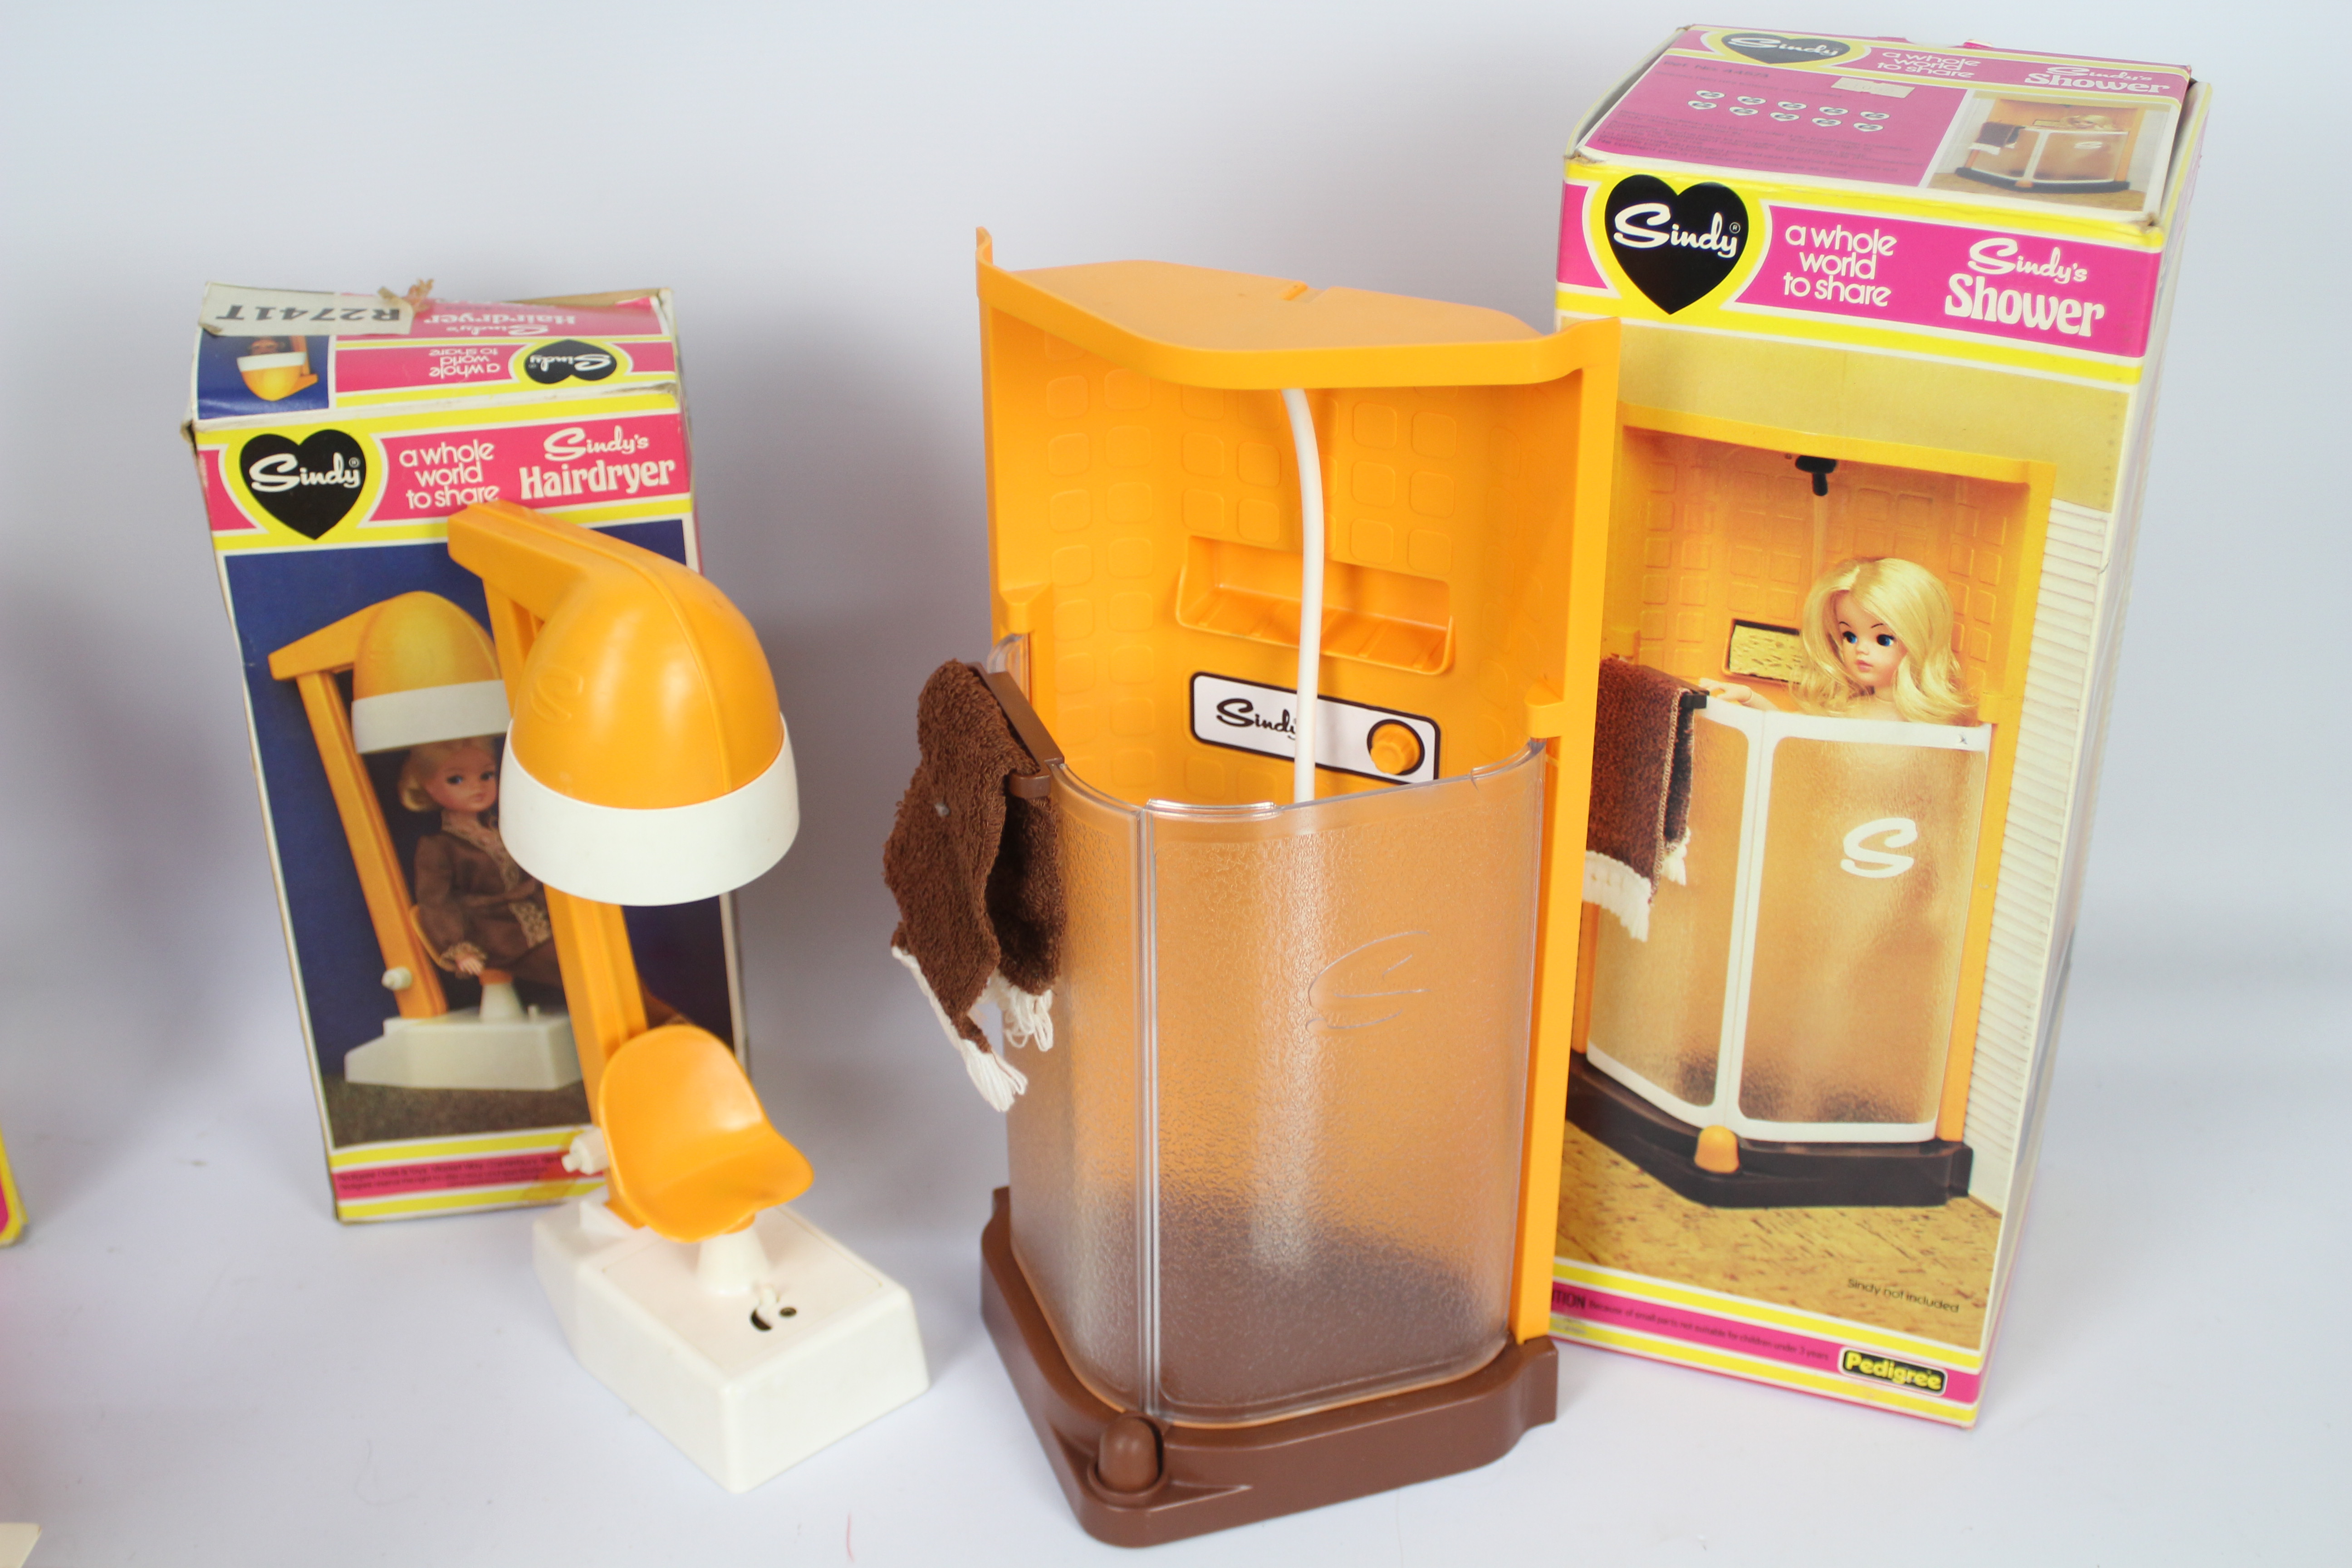 Pedigree - Sindy - A collection of Sindy bathroom items including boxed Shower, boxed Toilet, - Image 4 of 4